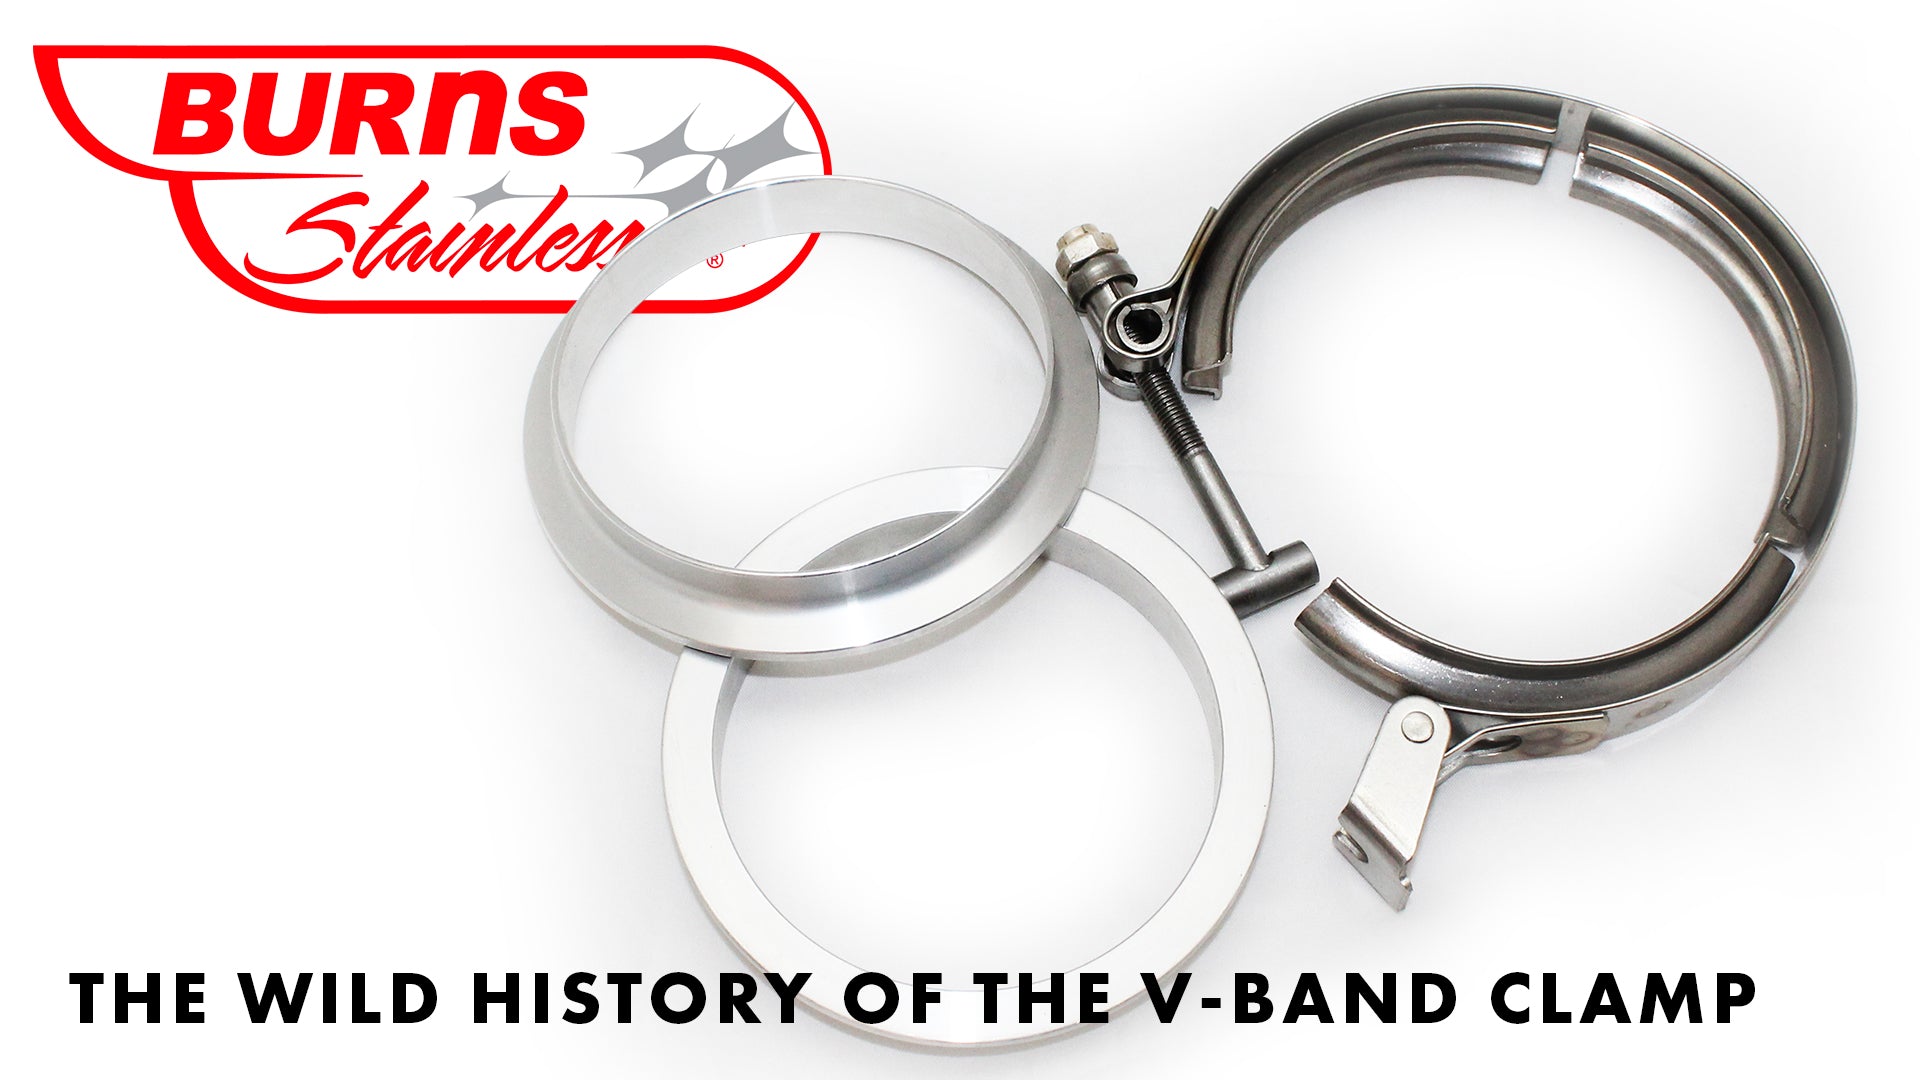 The Wild History of the V-Band Clamp